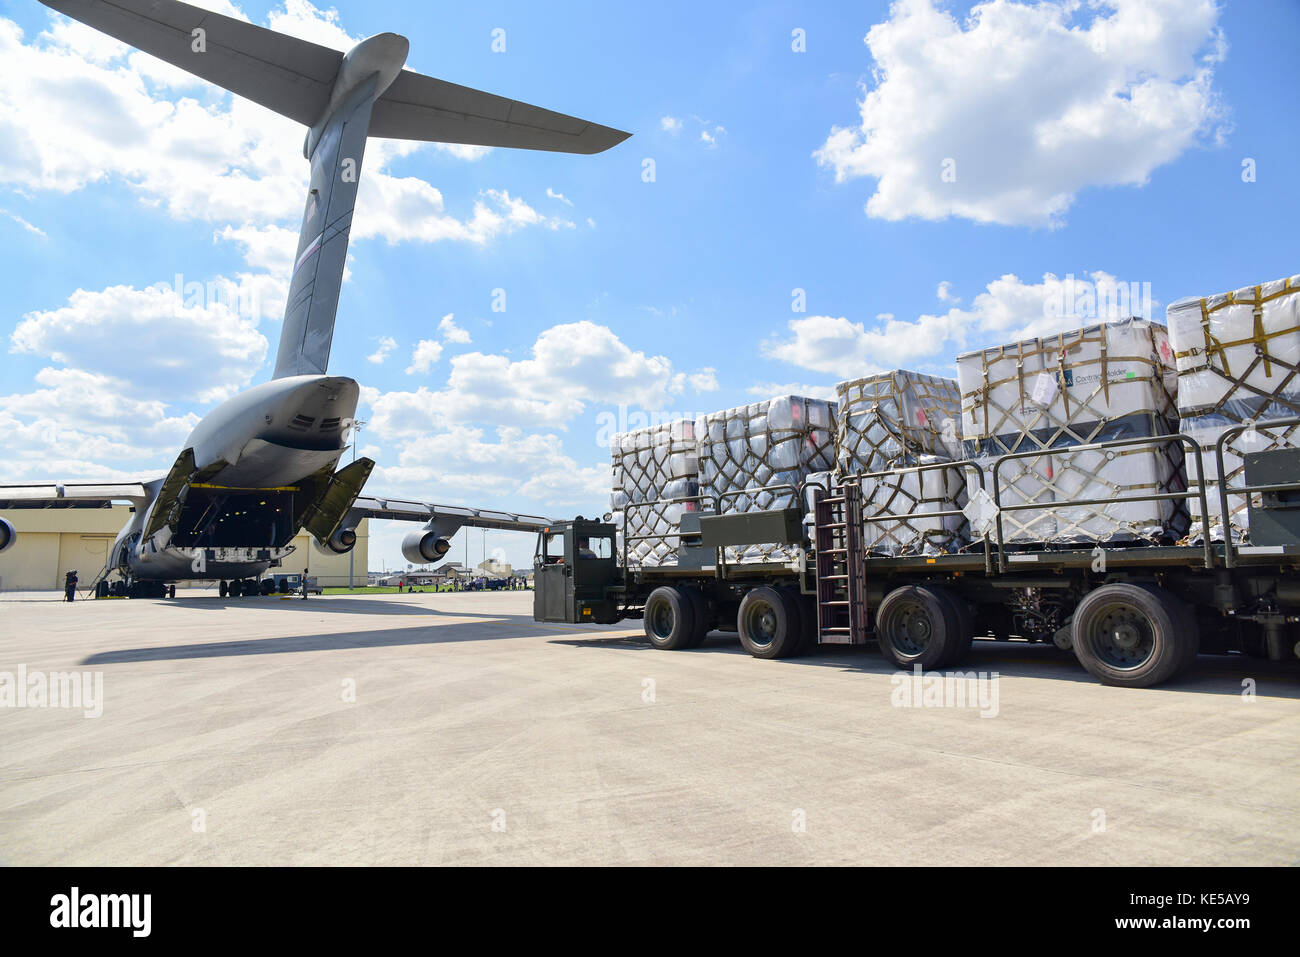 Pallets of supplies ready to be delivered to Texas in support of Hurricane Harvey relief efforts. Stock Photo